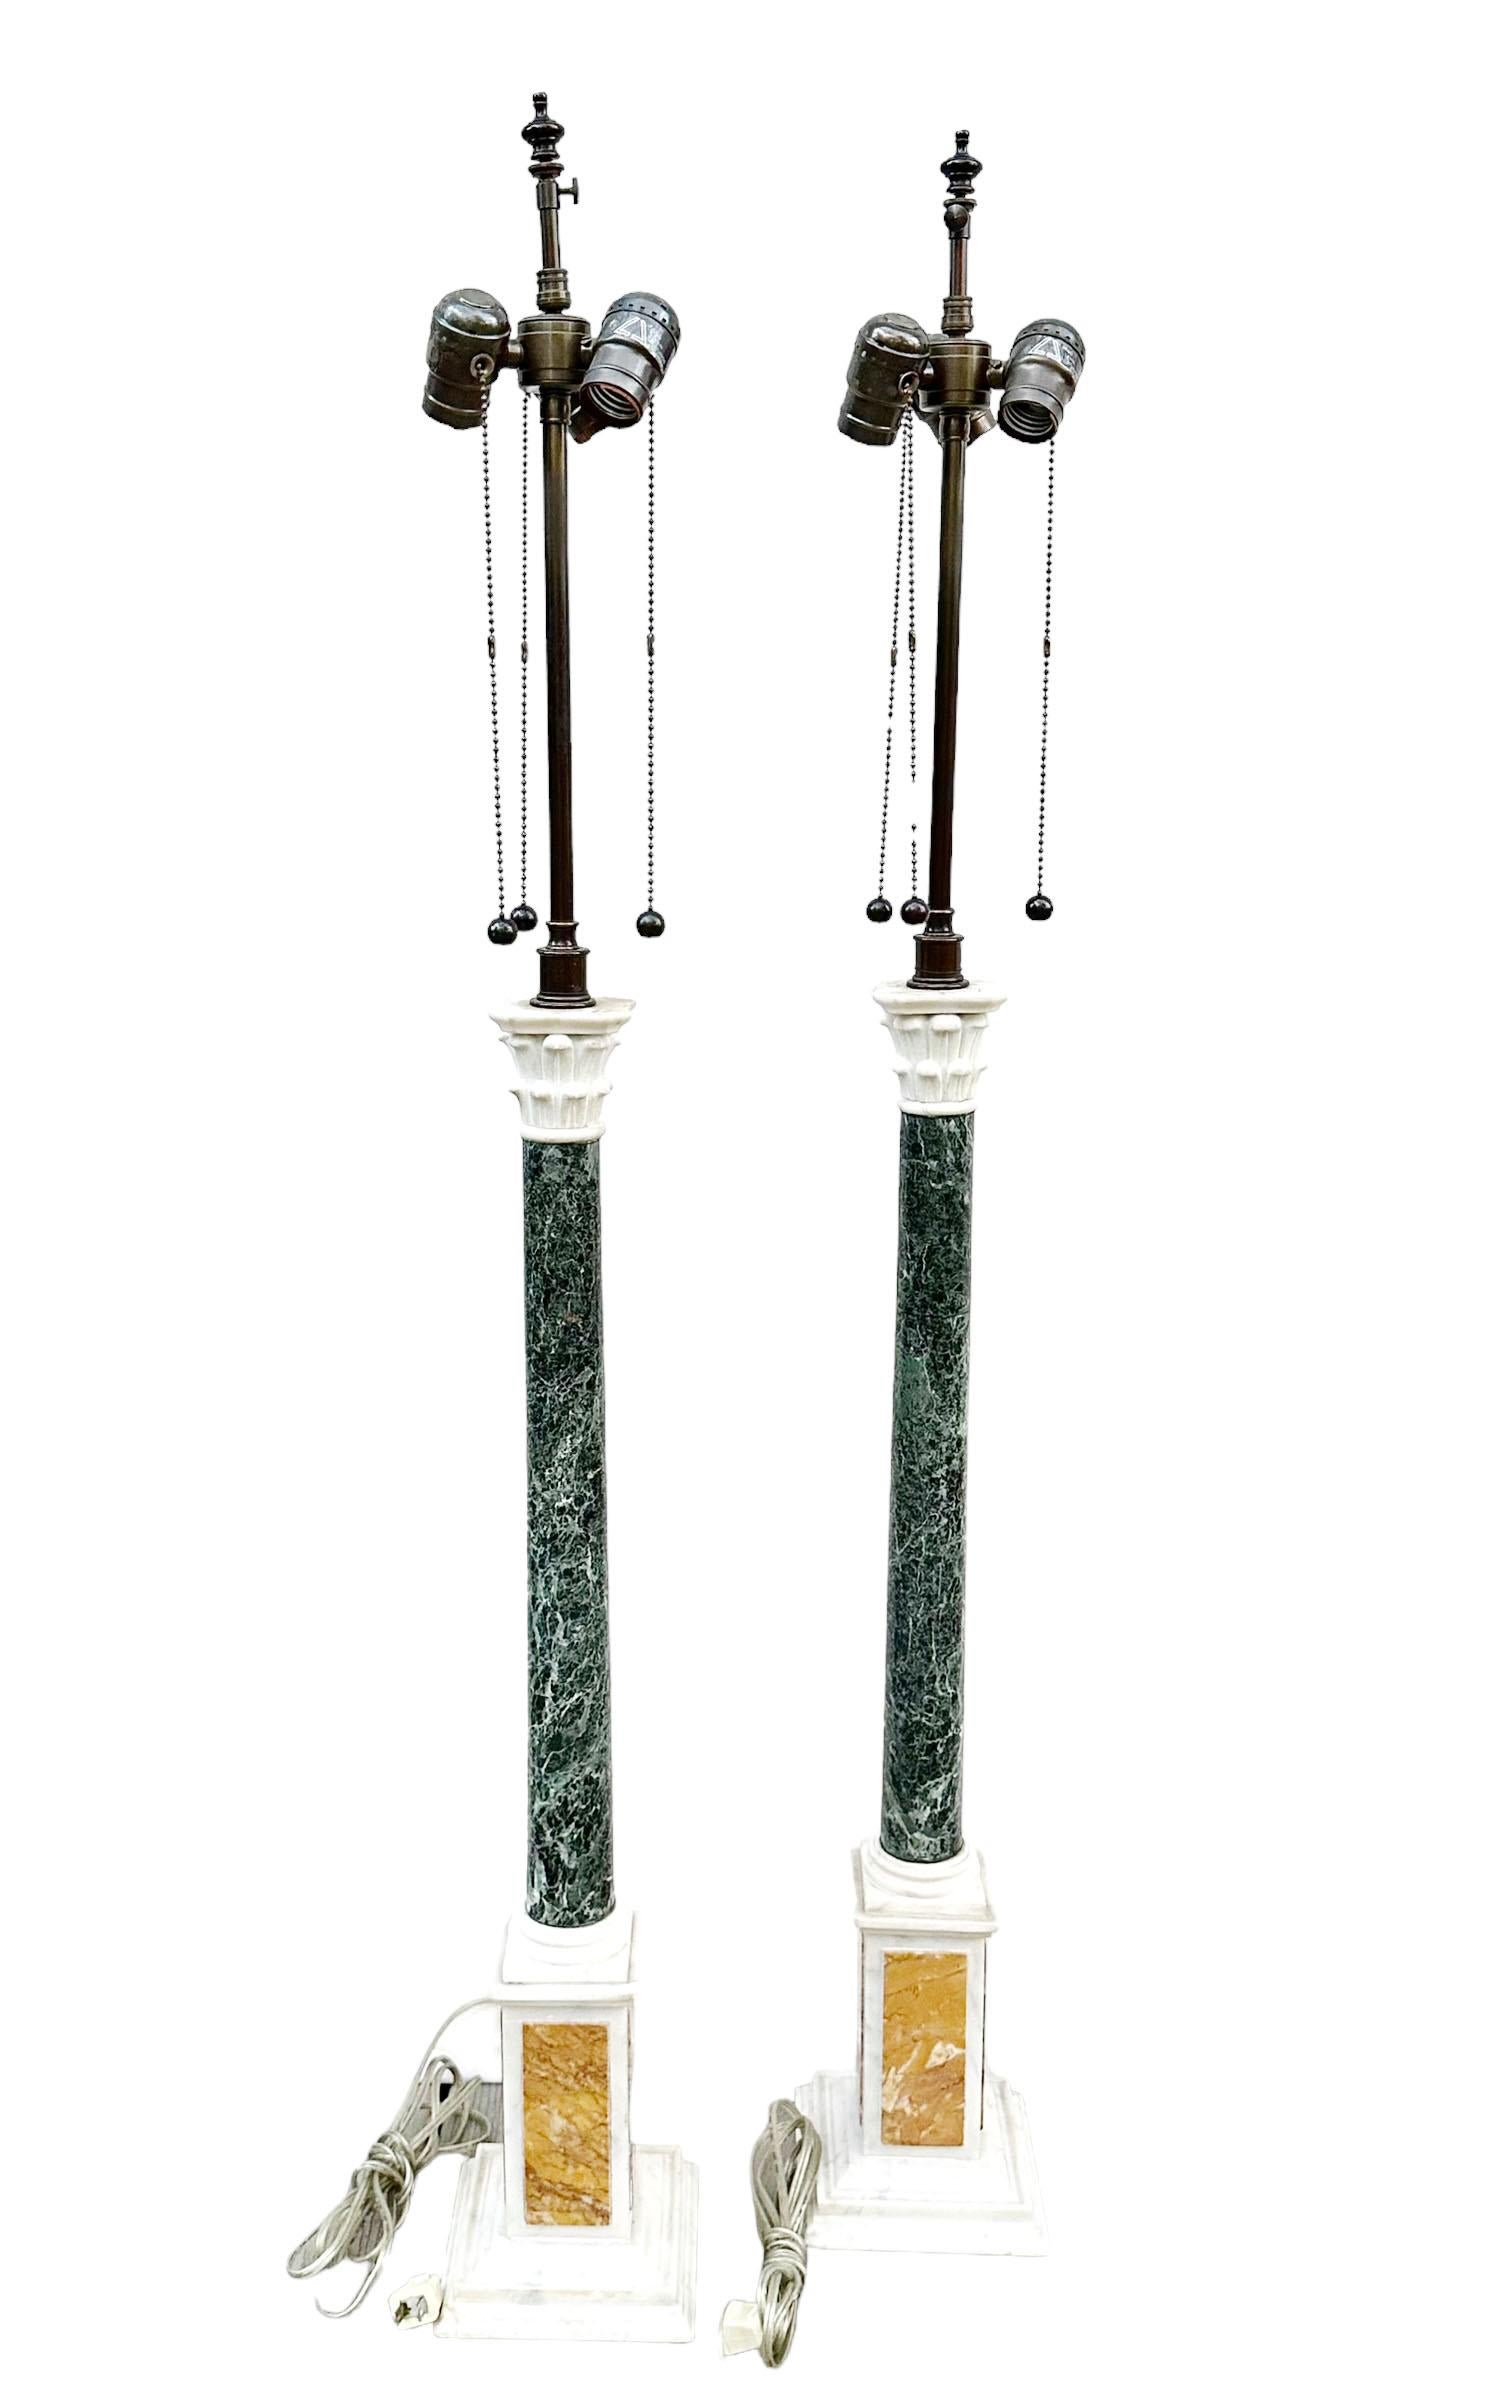 These fabulous early 19th century Italian lamps are grand tour columns for displaying objects at the very top. They have three specimens of marble and probably were electrified in the late sixties. These have been redone with three bob fixtures and